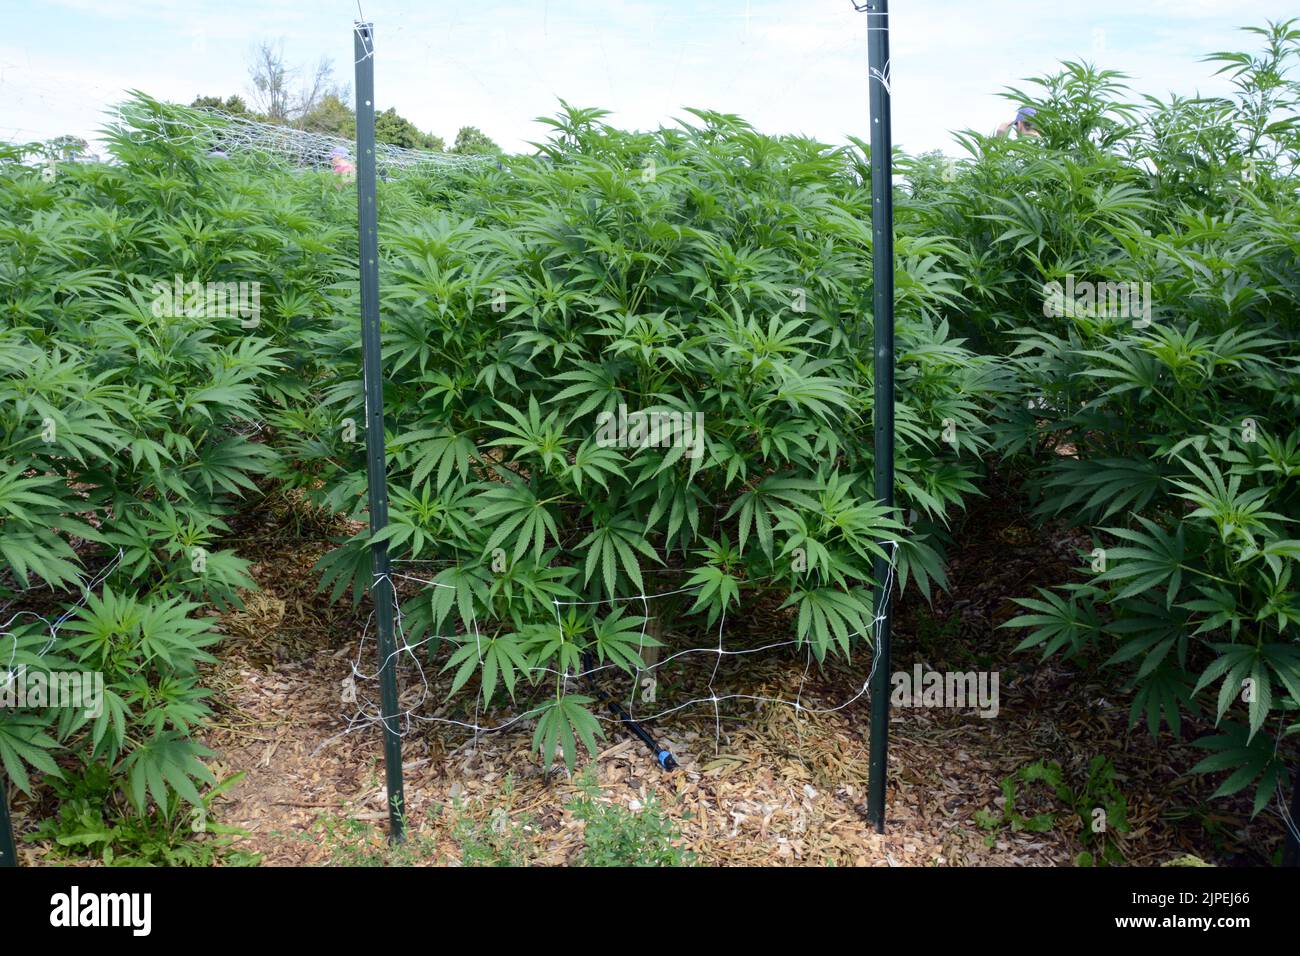 Legal recreational marijuana or cannabis plants being grown outdoors on a sustainable regenerative farm near the town of Creemore, Ontario, Canada. Stock Photo